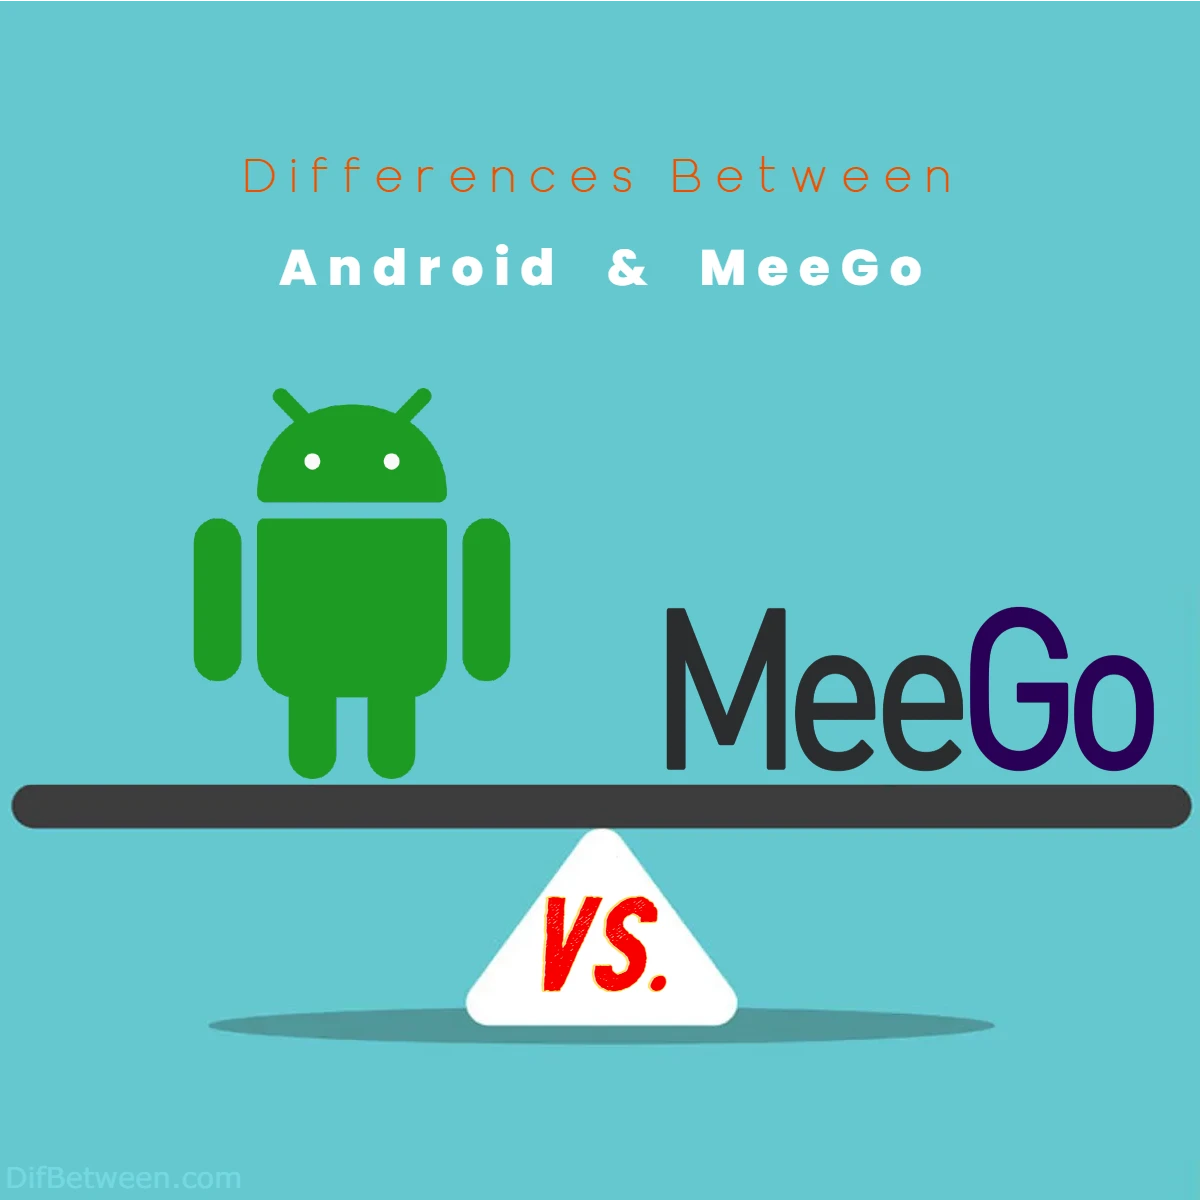 Differences Between Android vs MeeGo